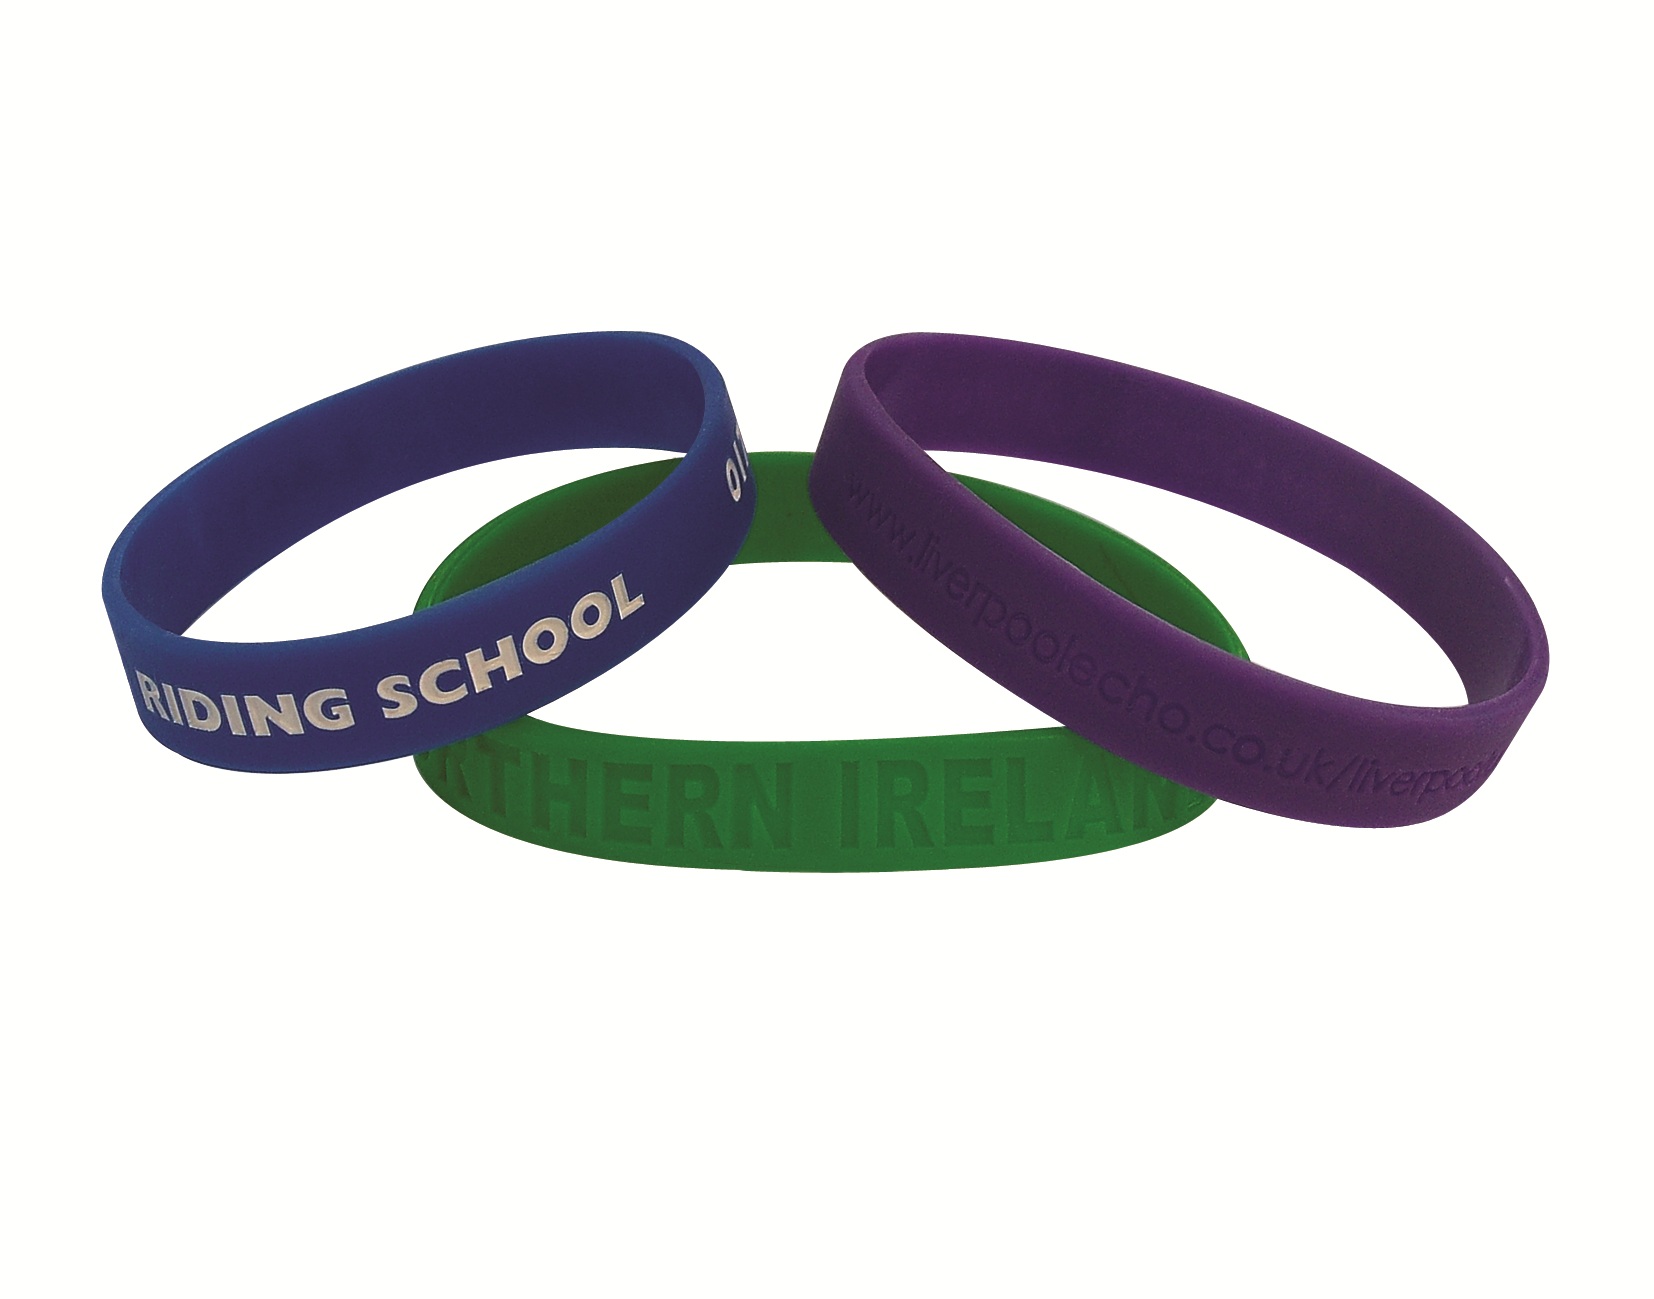 Promotional Single Colour Wristband - Debossed/Sunken with Colour Fill In